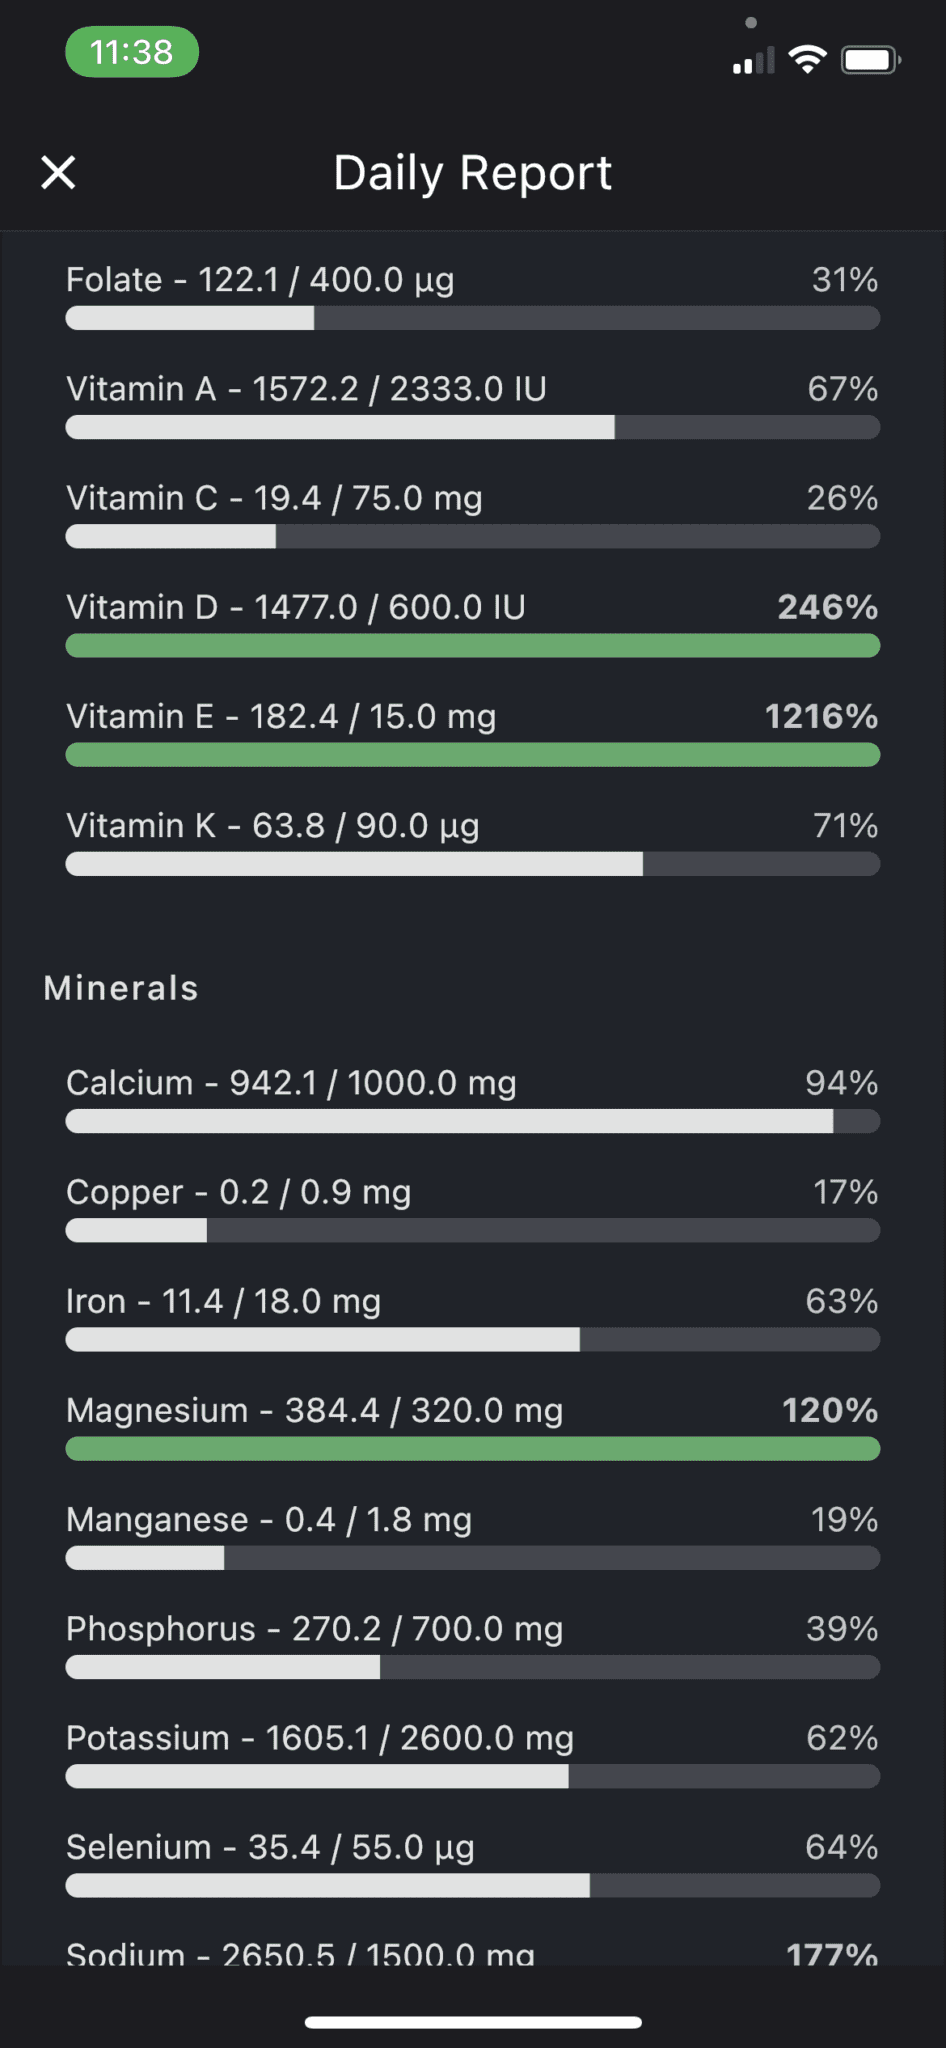 Scroll through granular details of your vitamin and mineral intake on the daily report or nutrition report.